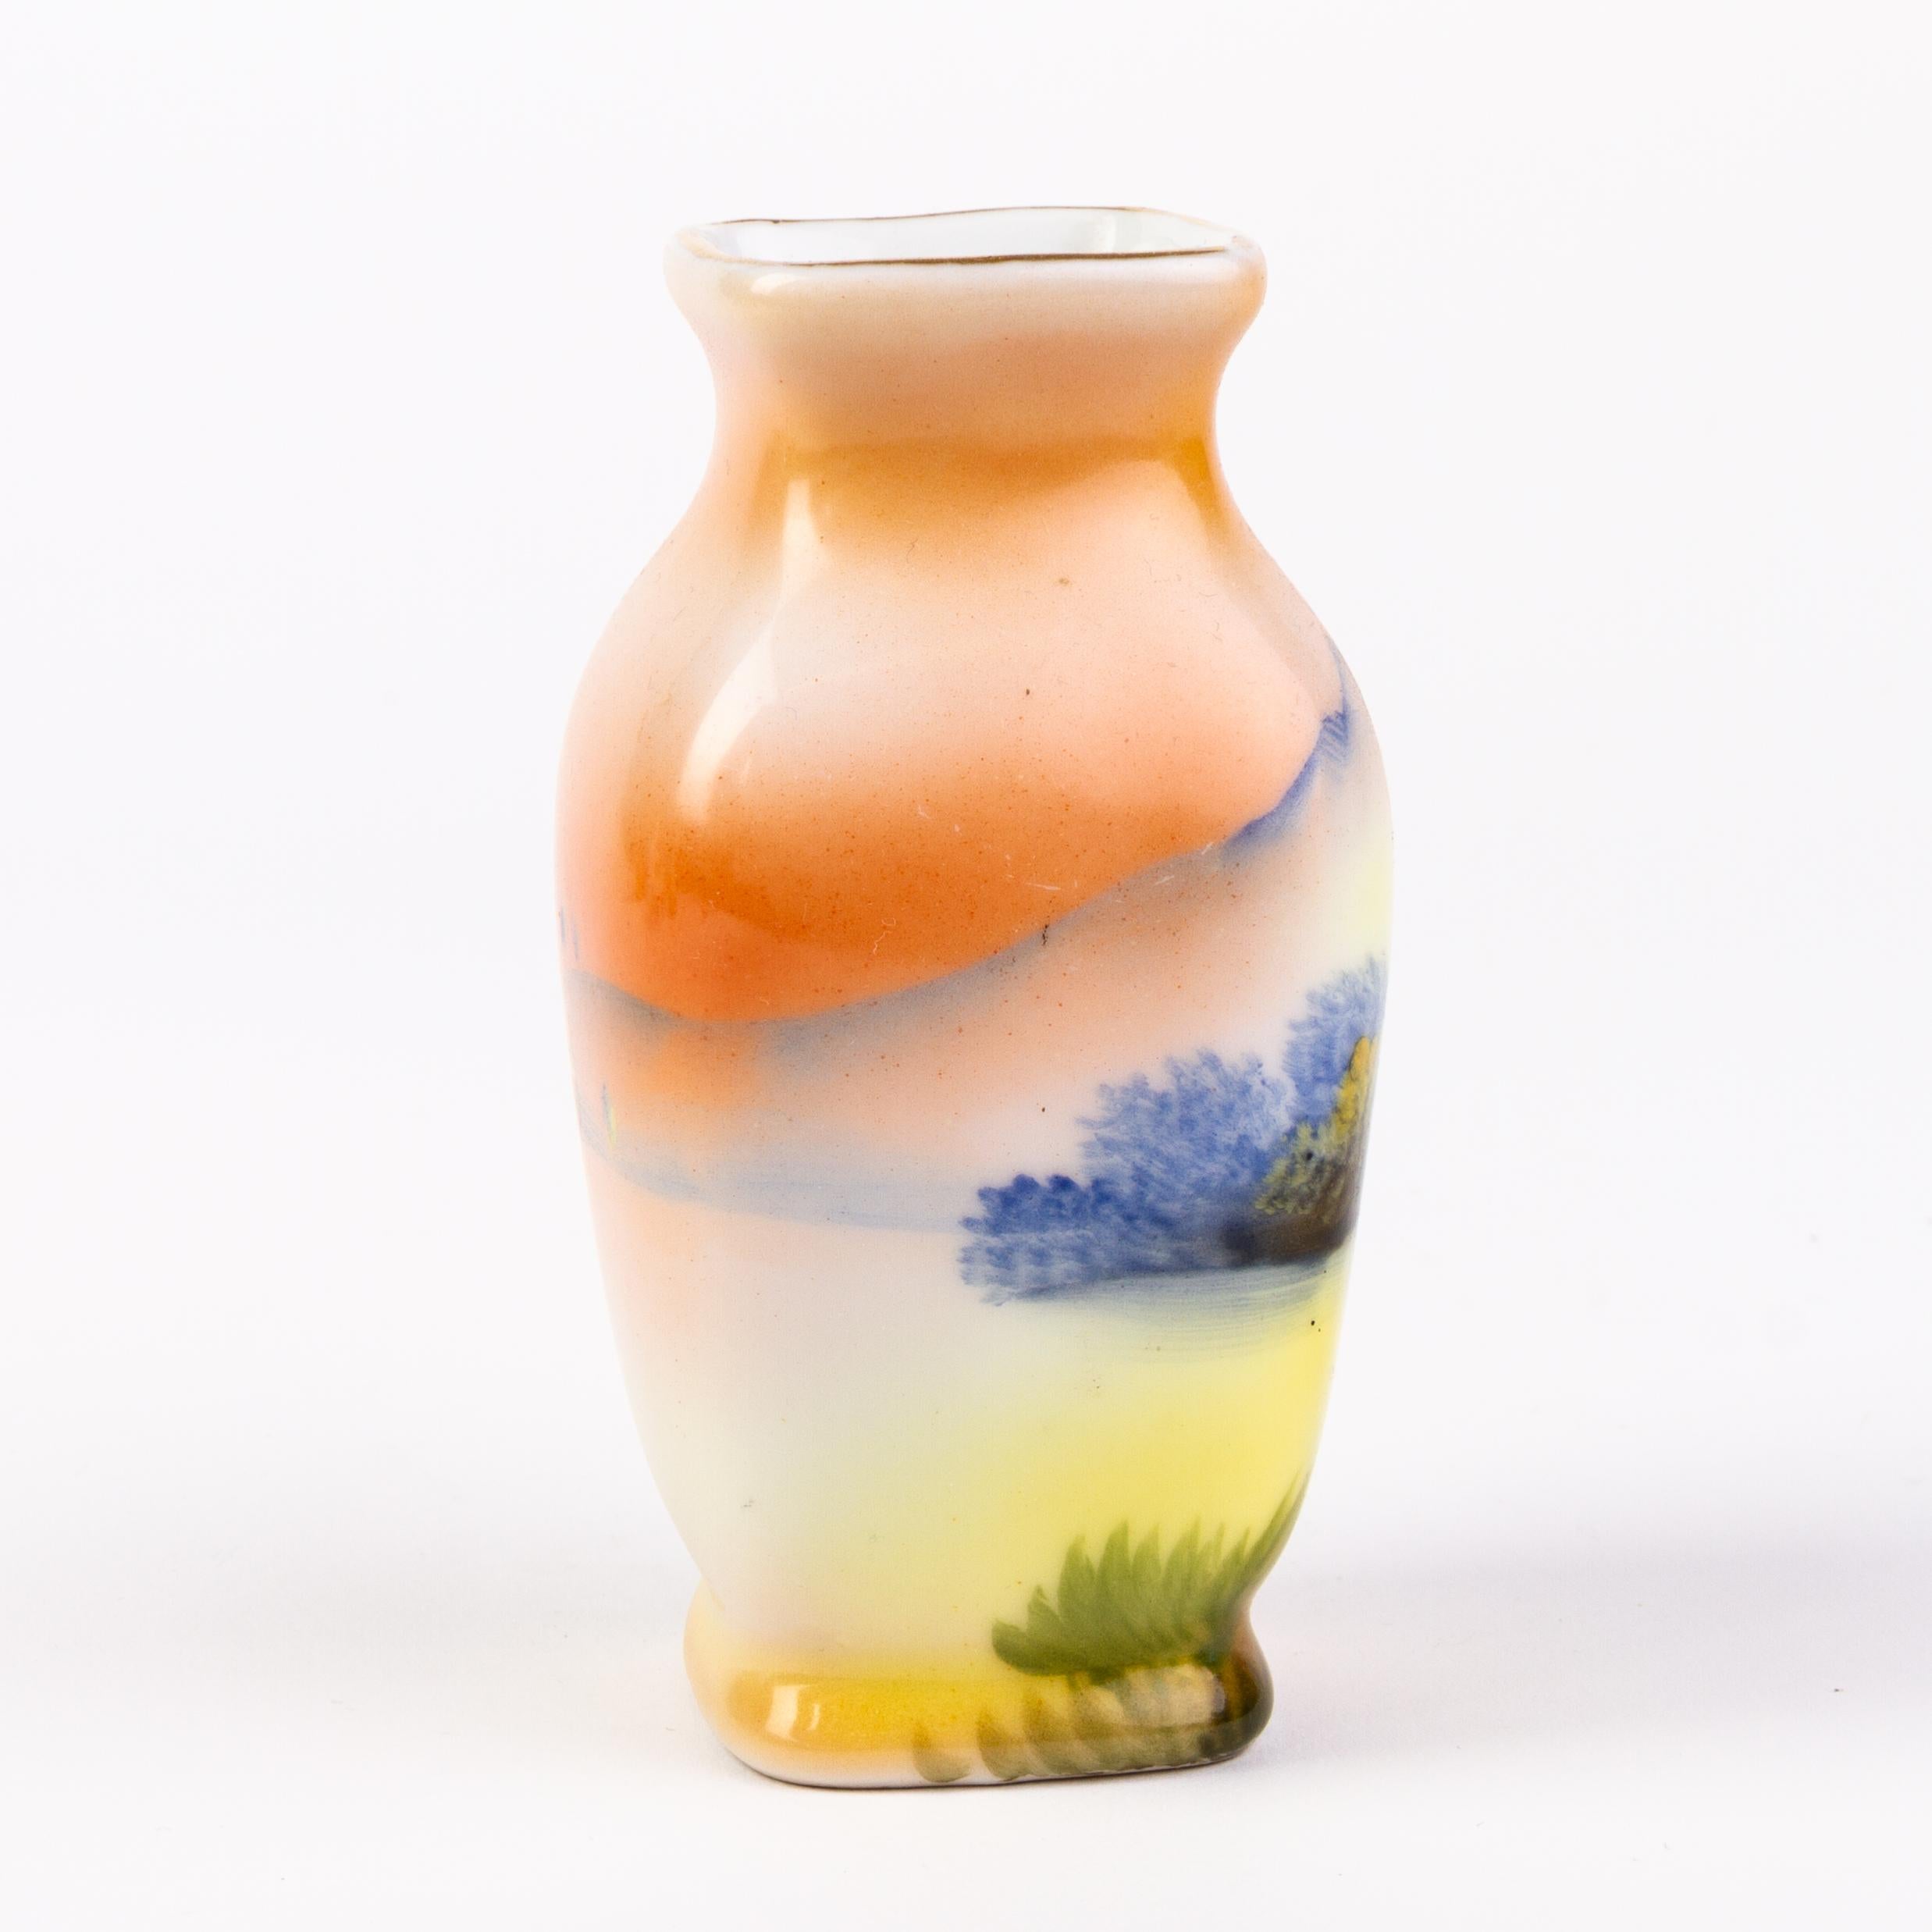 In good condition
From a private collection
Noritake Japanese Porcelain Art Deco Vase 